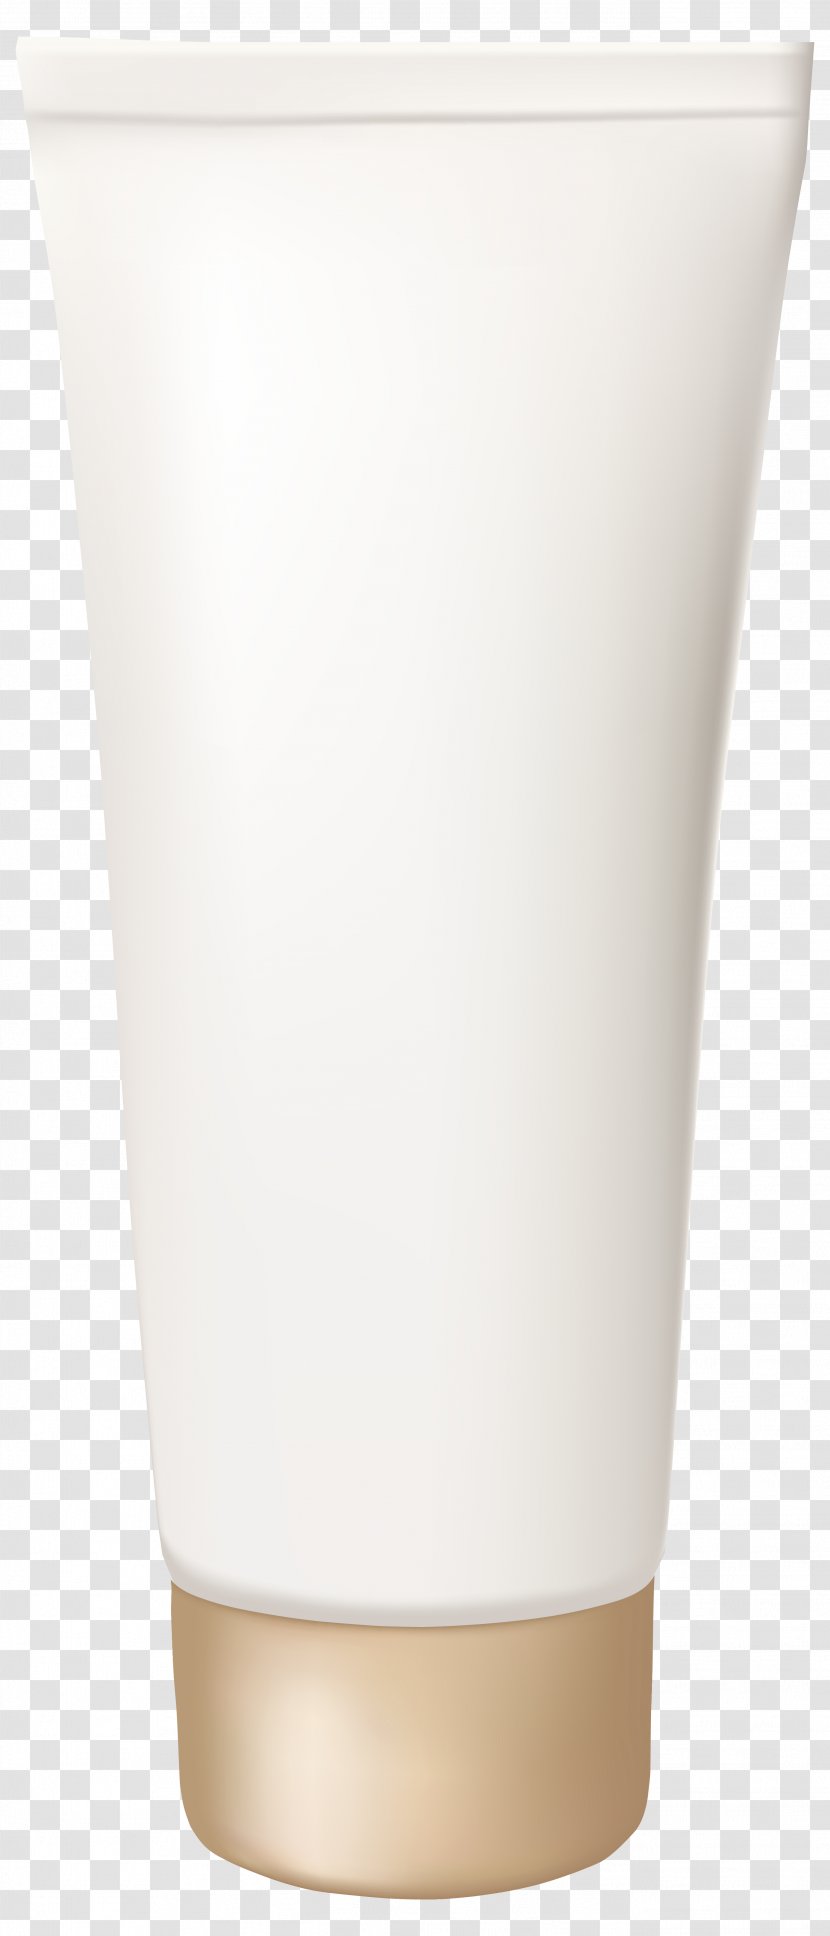 Cup - Drinkware - Cream Tube Clipart Image Transparent PNG